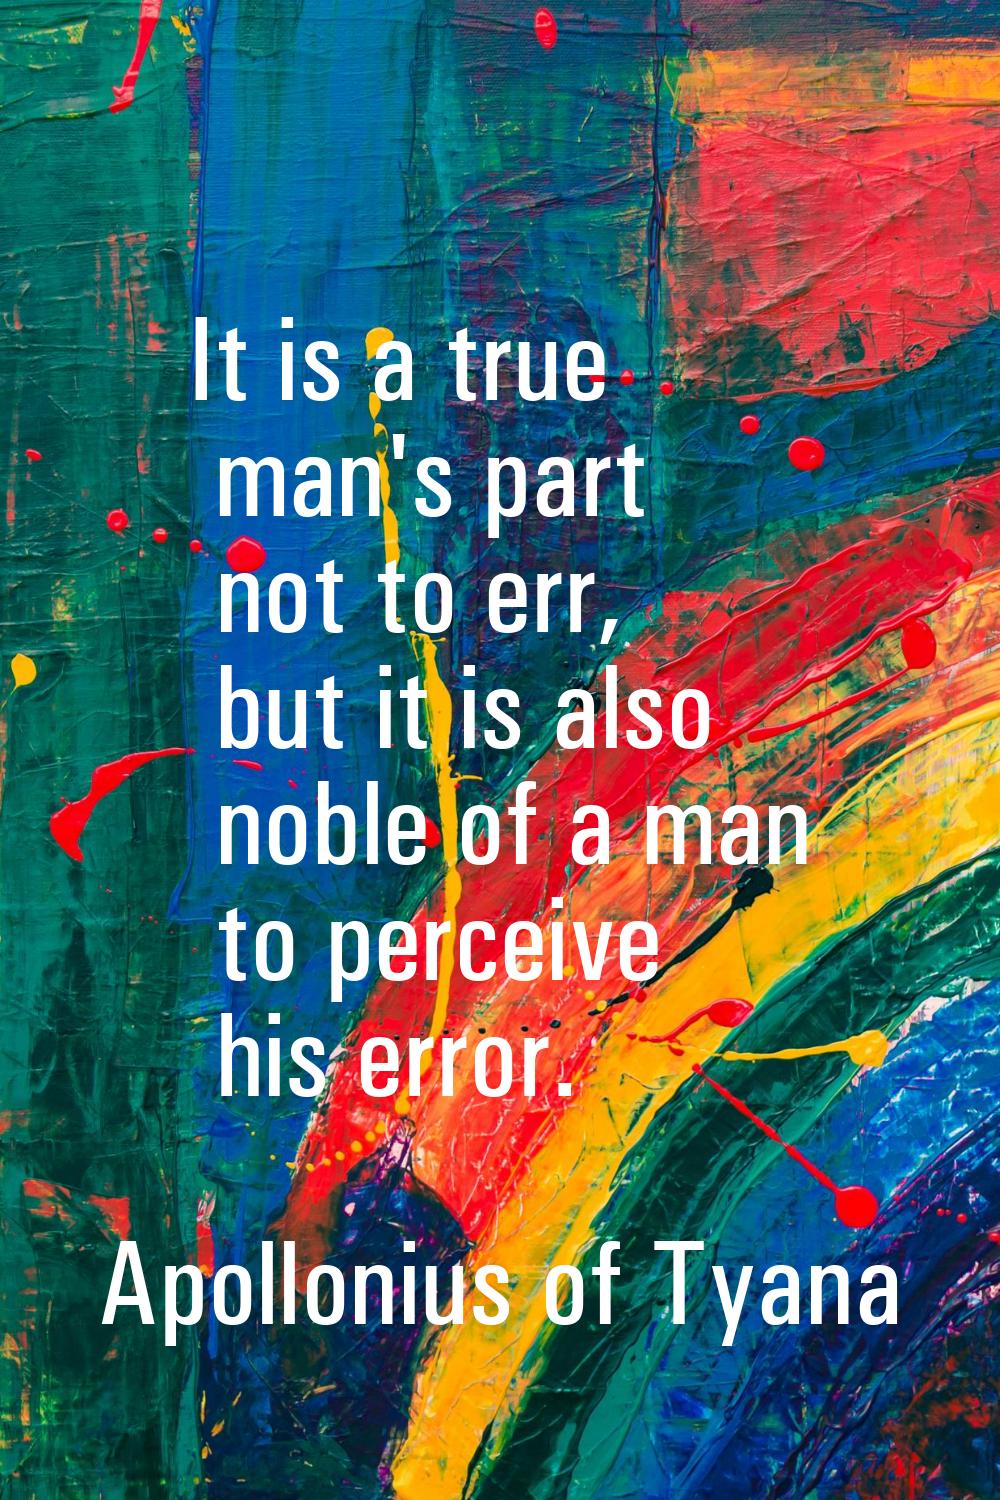 It is a true man's part not to err, but it is also noble of a man to perceive his error.